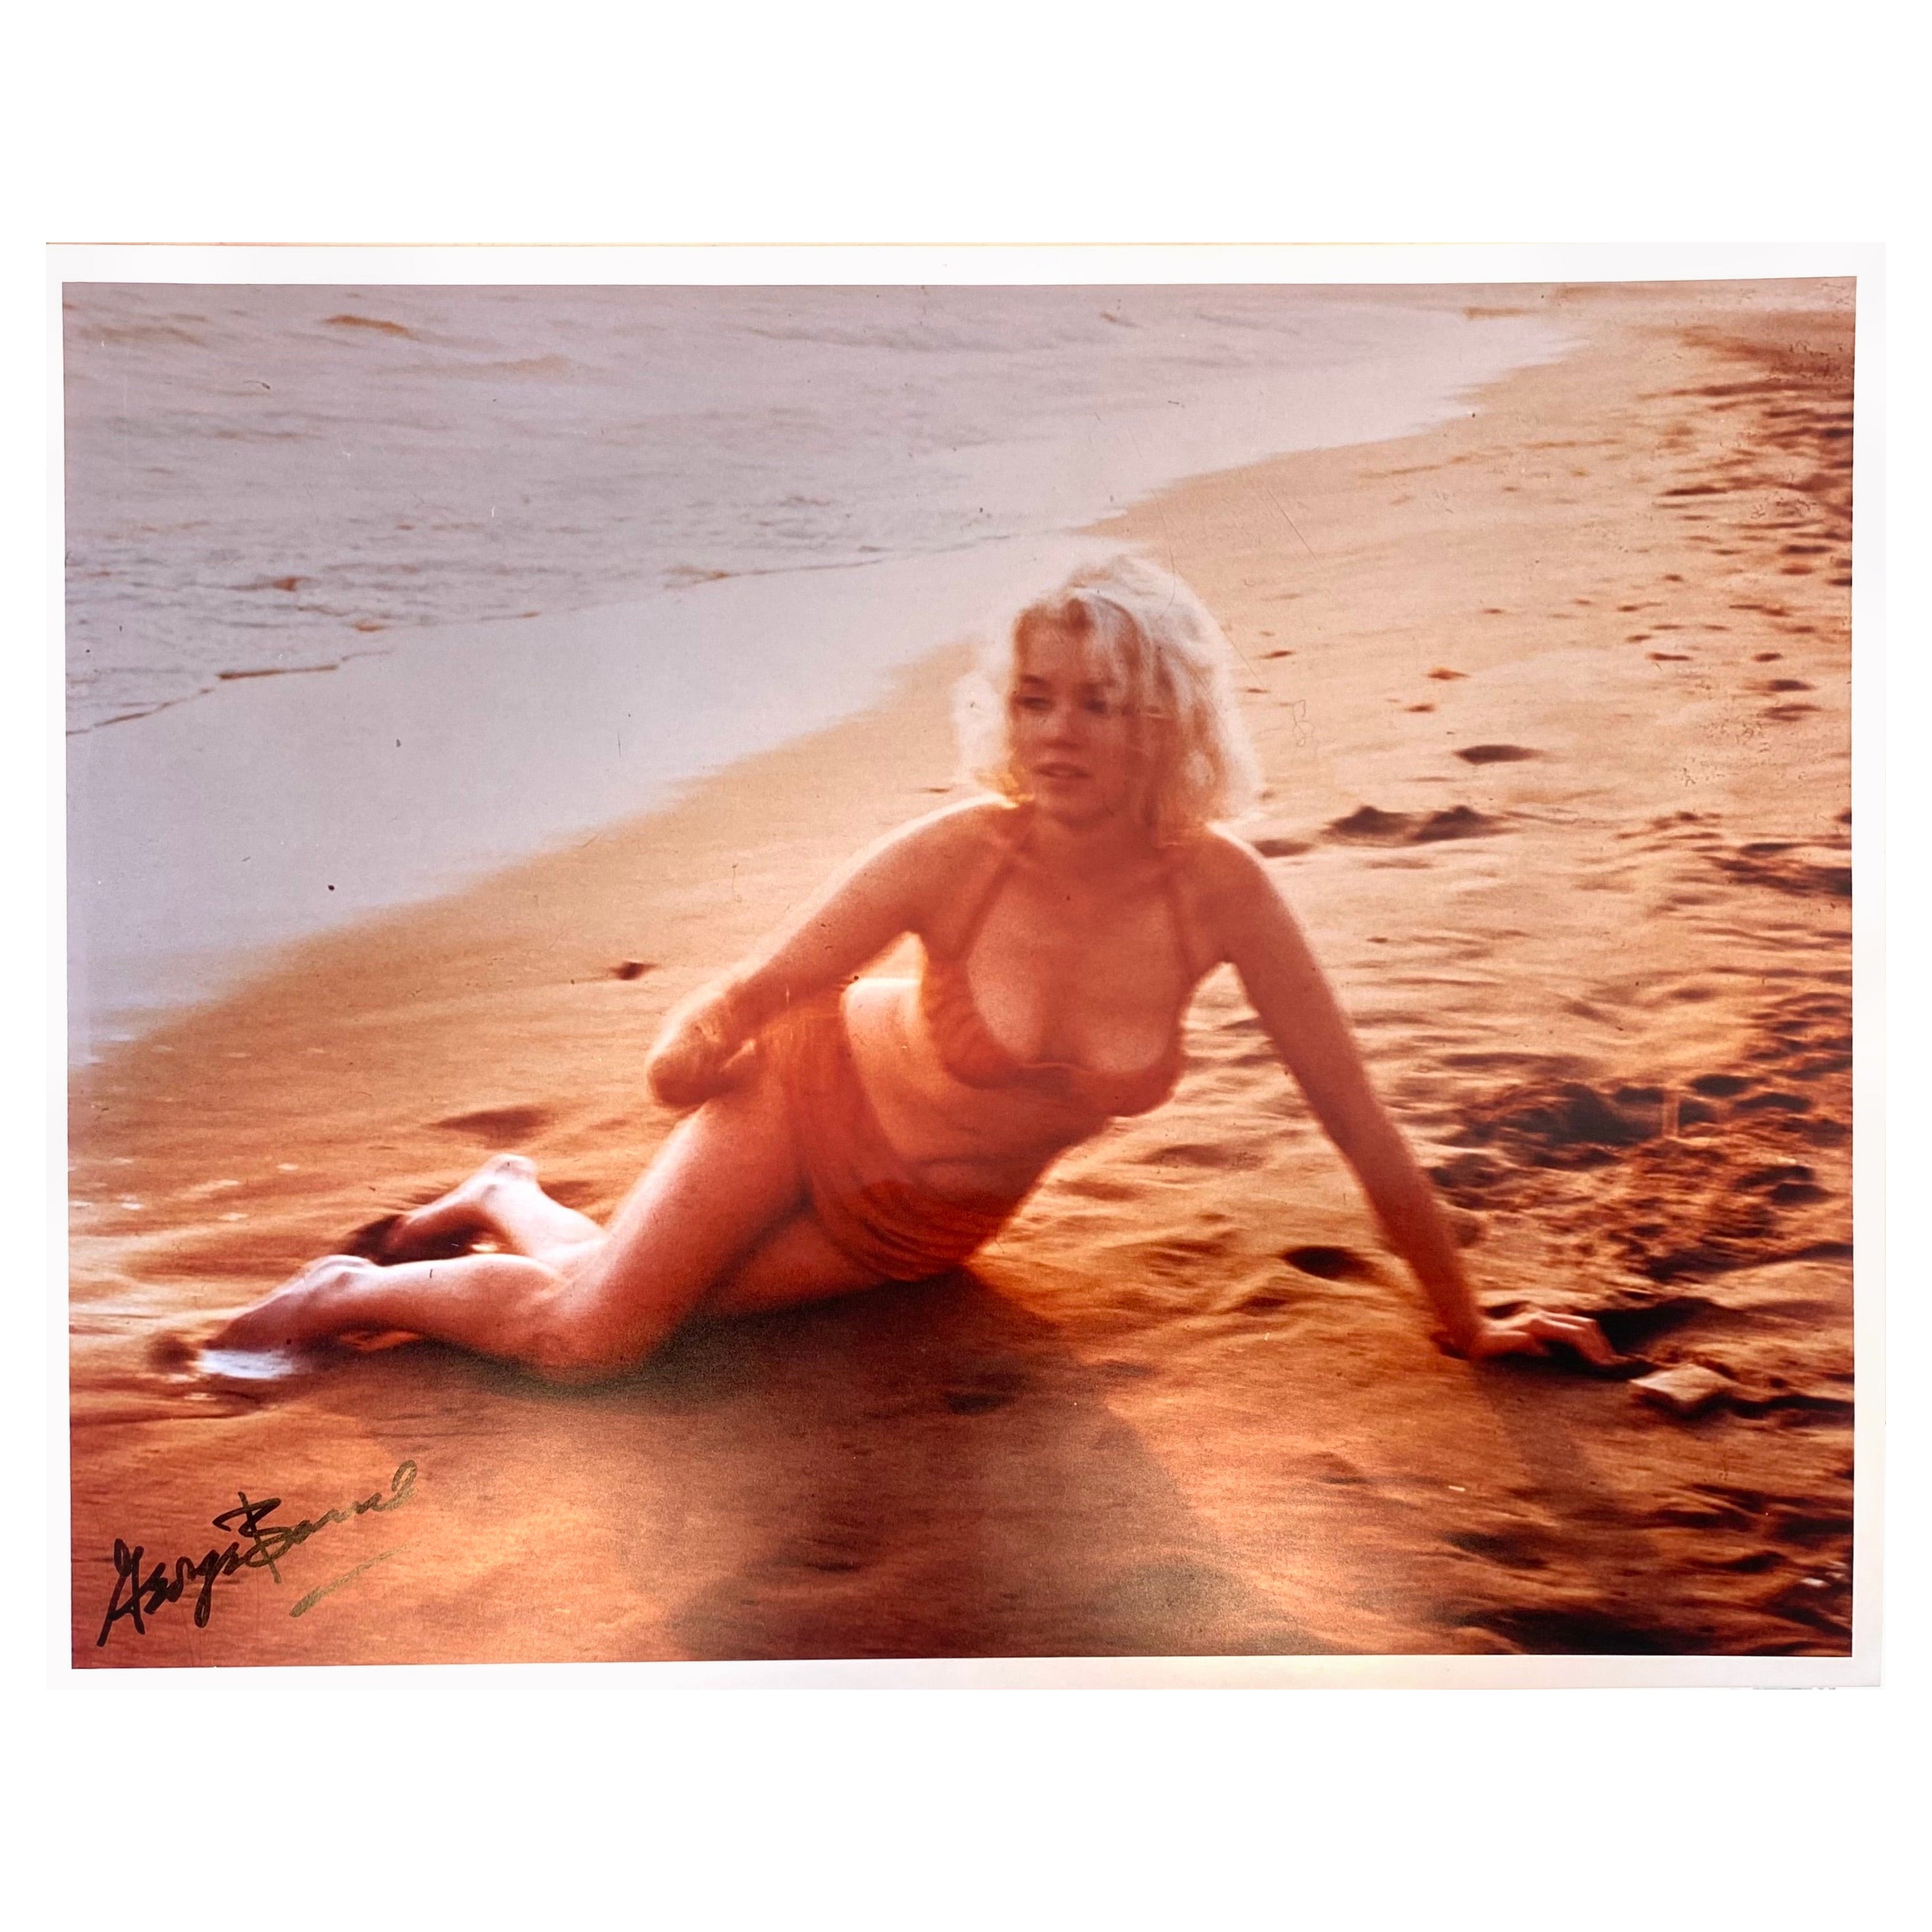 Photograph of Marilyn Monroe by G